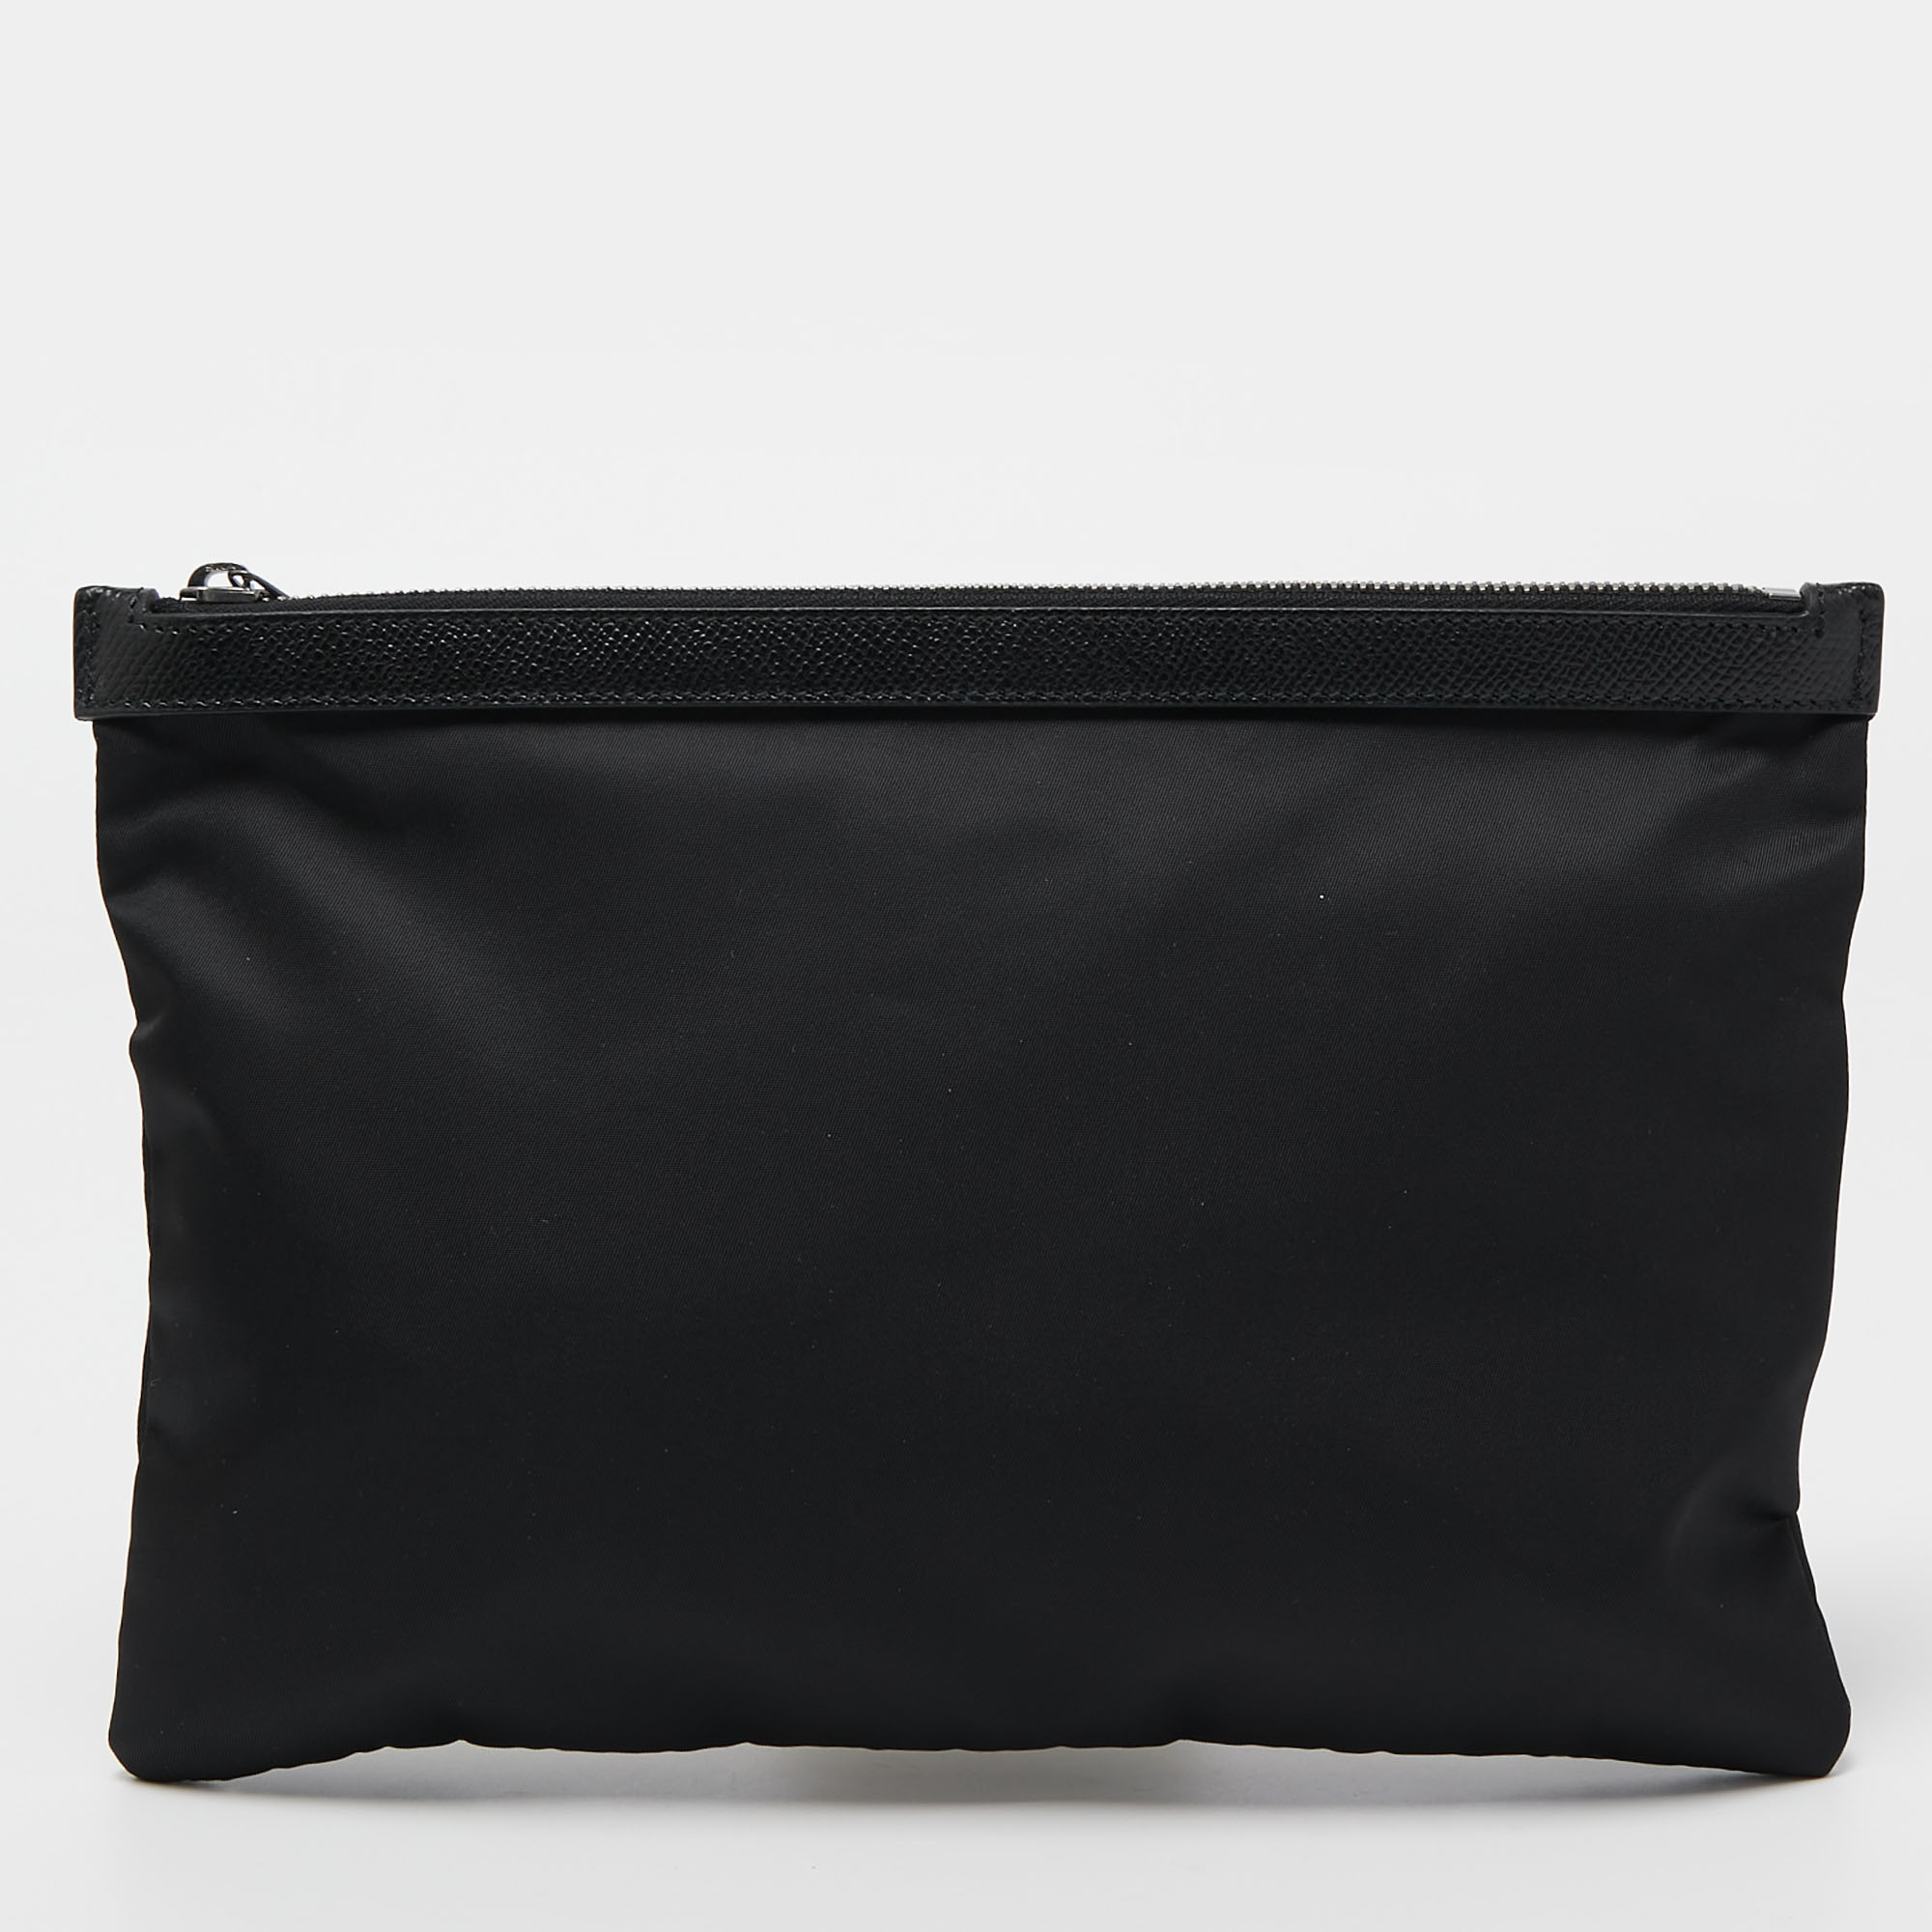 Dolce & Gabbana Black Nylon And Leather Patchwork Zip Pouch